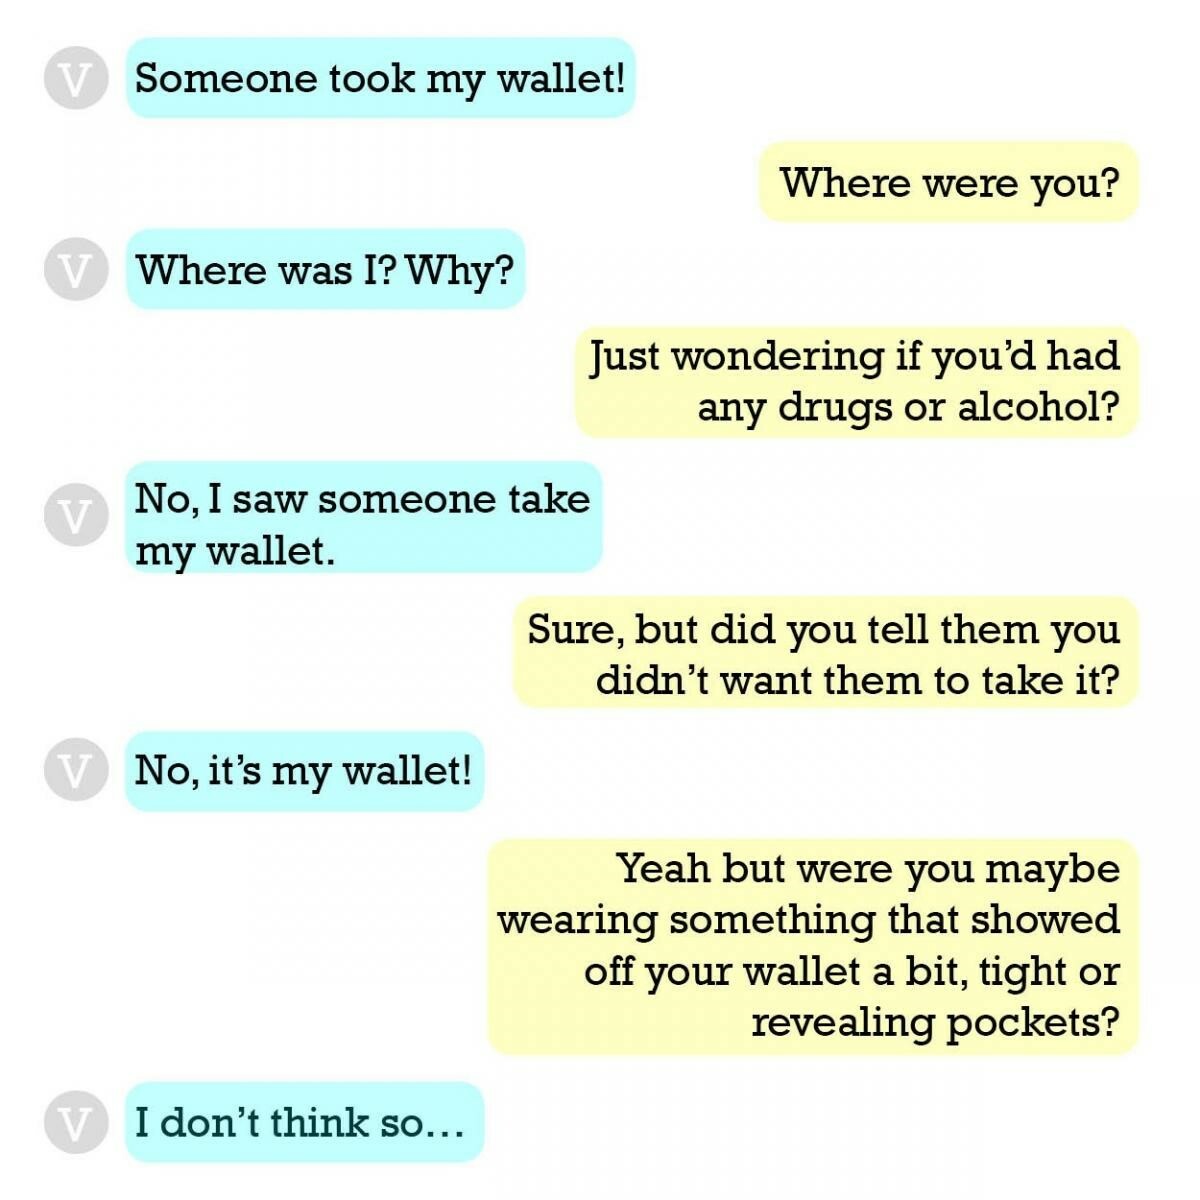 Text messaging exchange between two people. Conversation says: V: Someone took my wallet! Response: Where were you? V: Where was I? Why? Response: Just wondering if you'd had any drugs or alcohol? V: No, I saw someone take my wallet. Response: Sure, but did you tell them you didn't want them to take it? V: No, it's my wallet! Response: Yeah but were you maybe wearing something that showed off your wallet a bit, tight or revealing pockets? V: I don't think so...